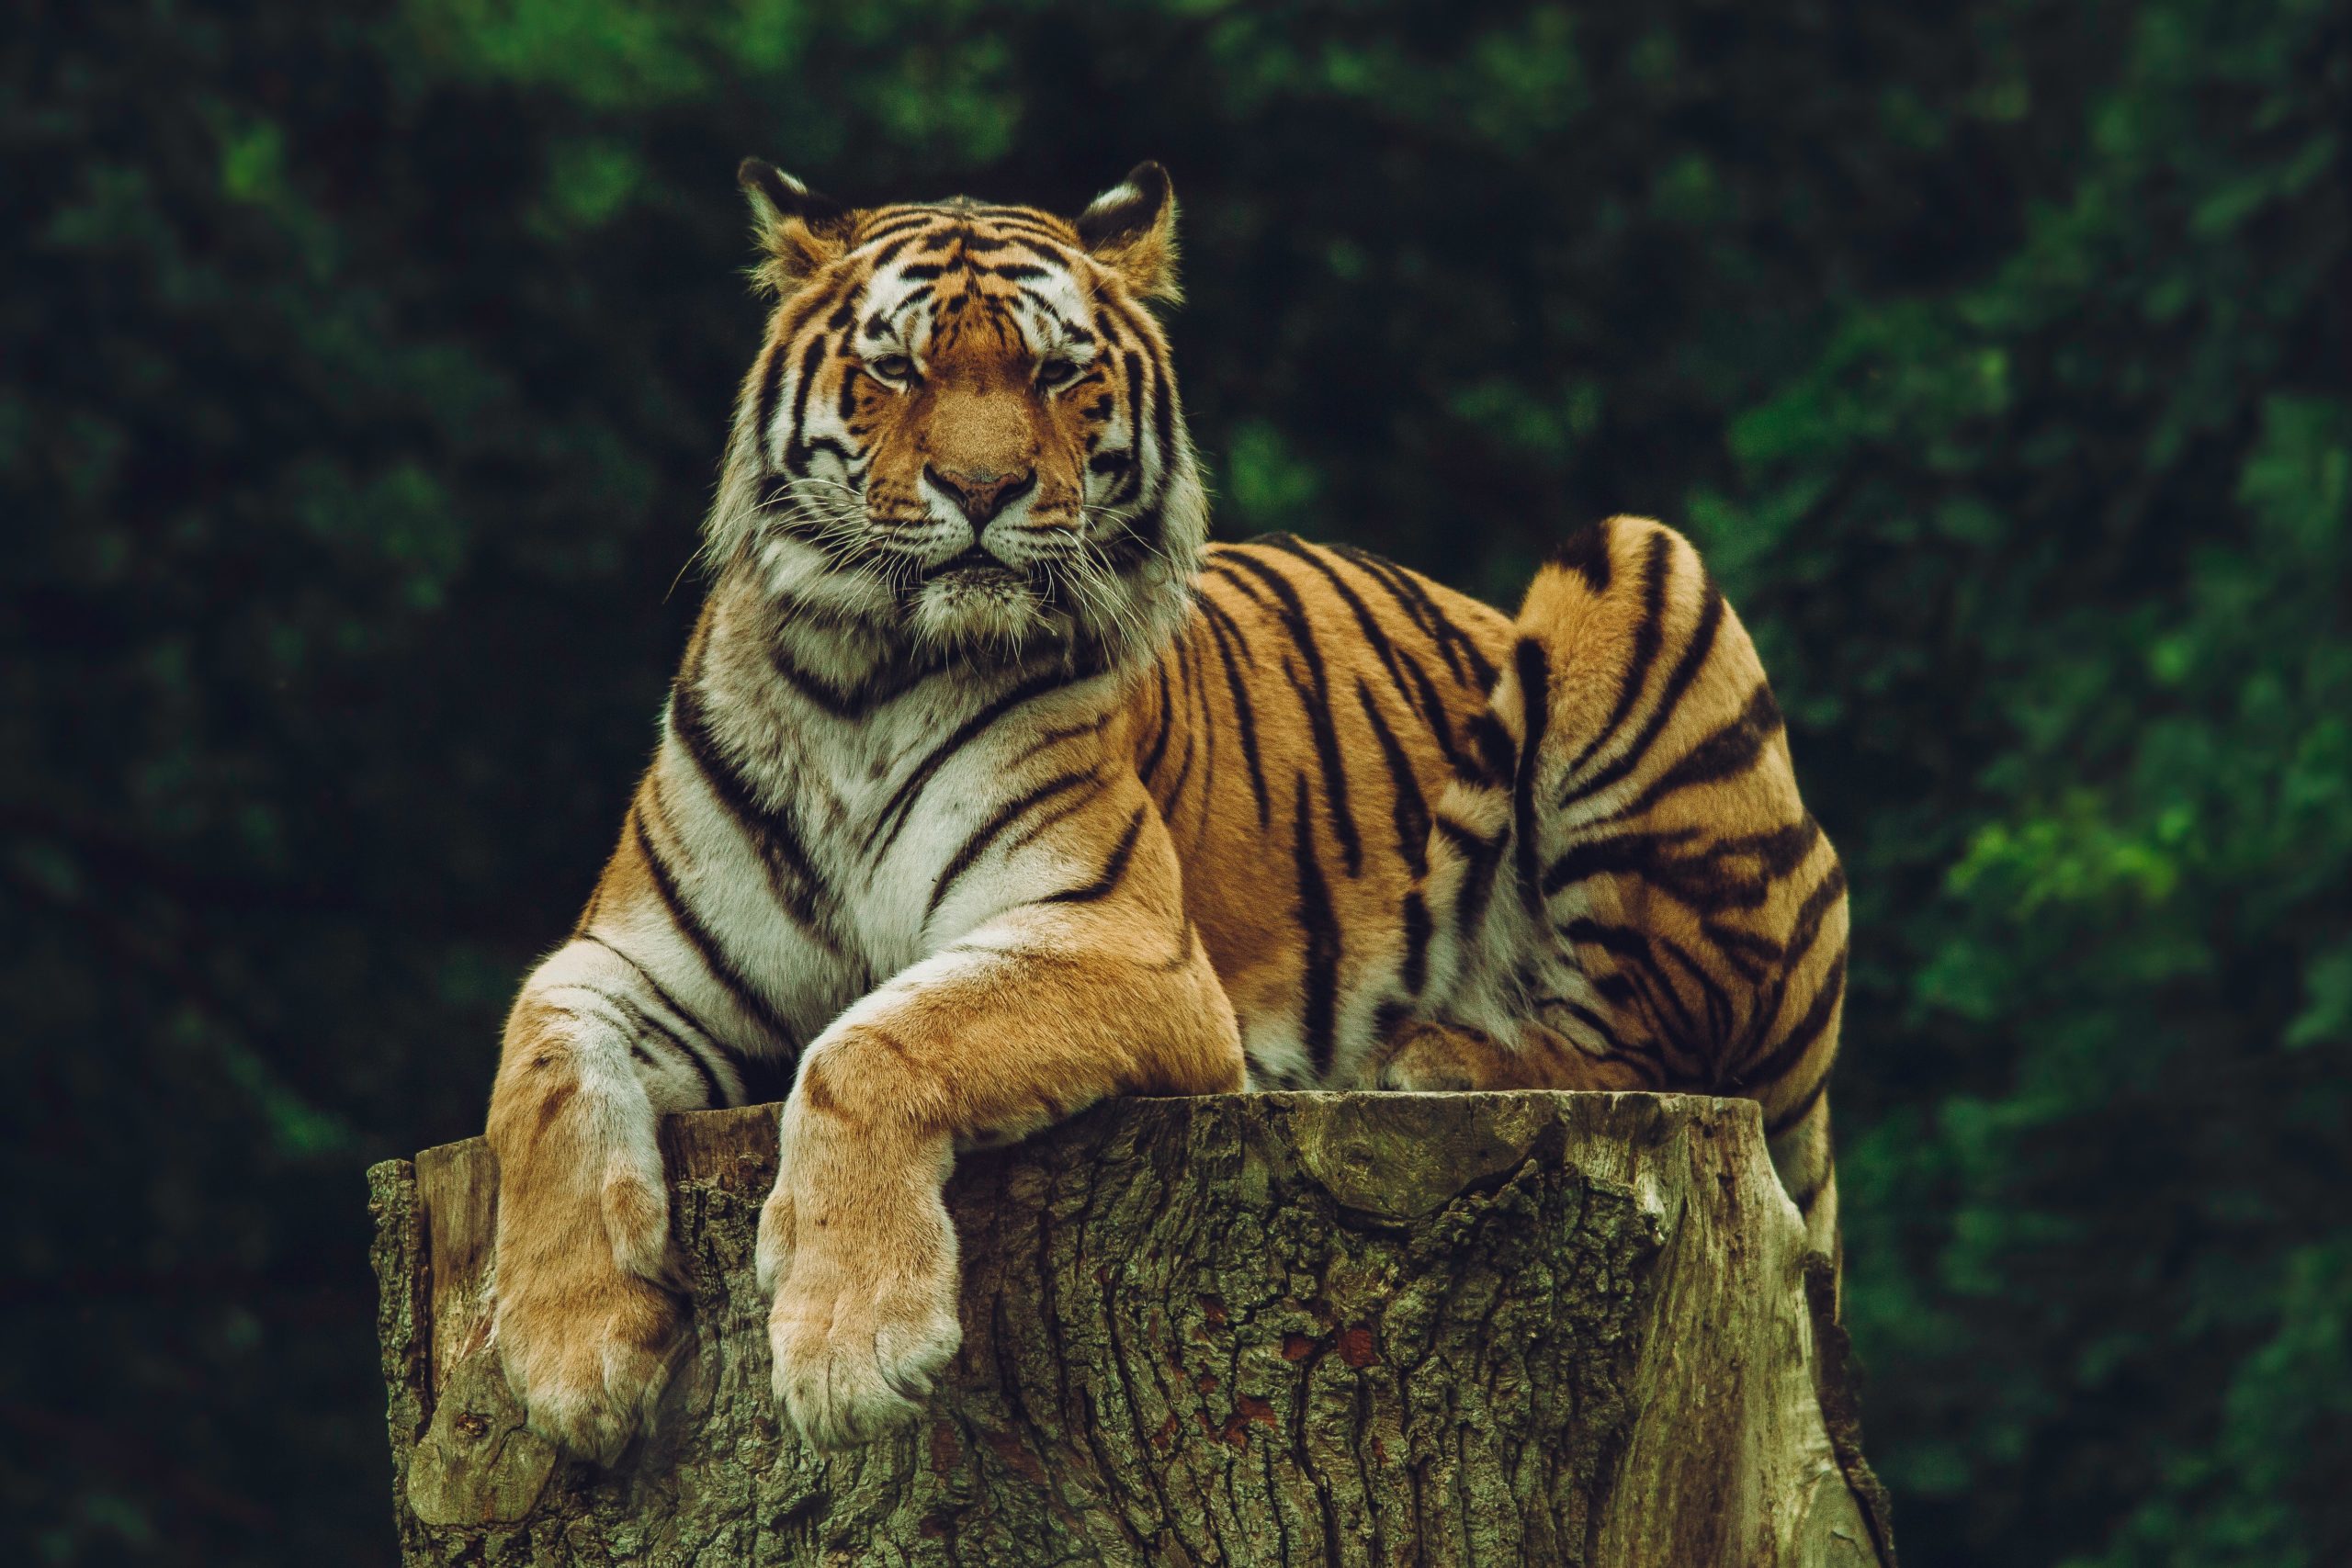 Tiger perched on a tree stump